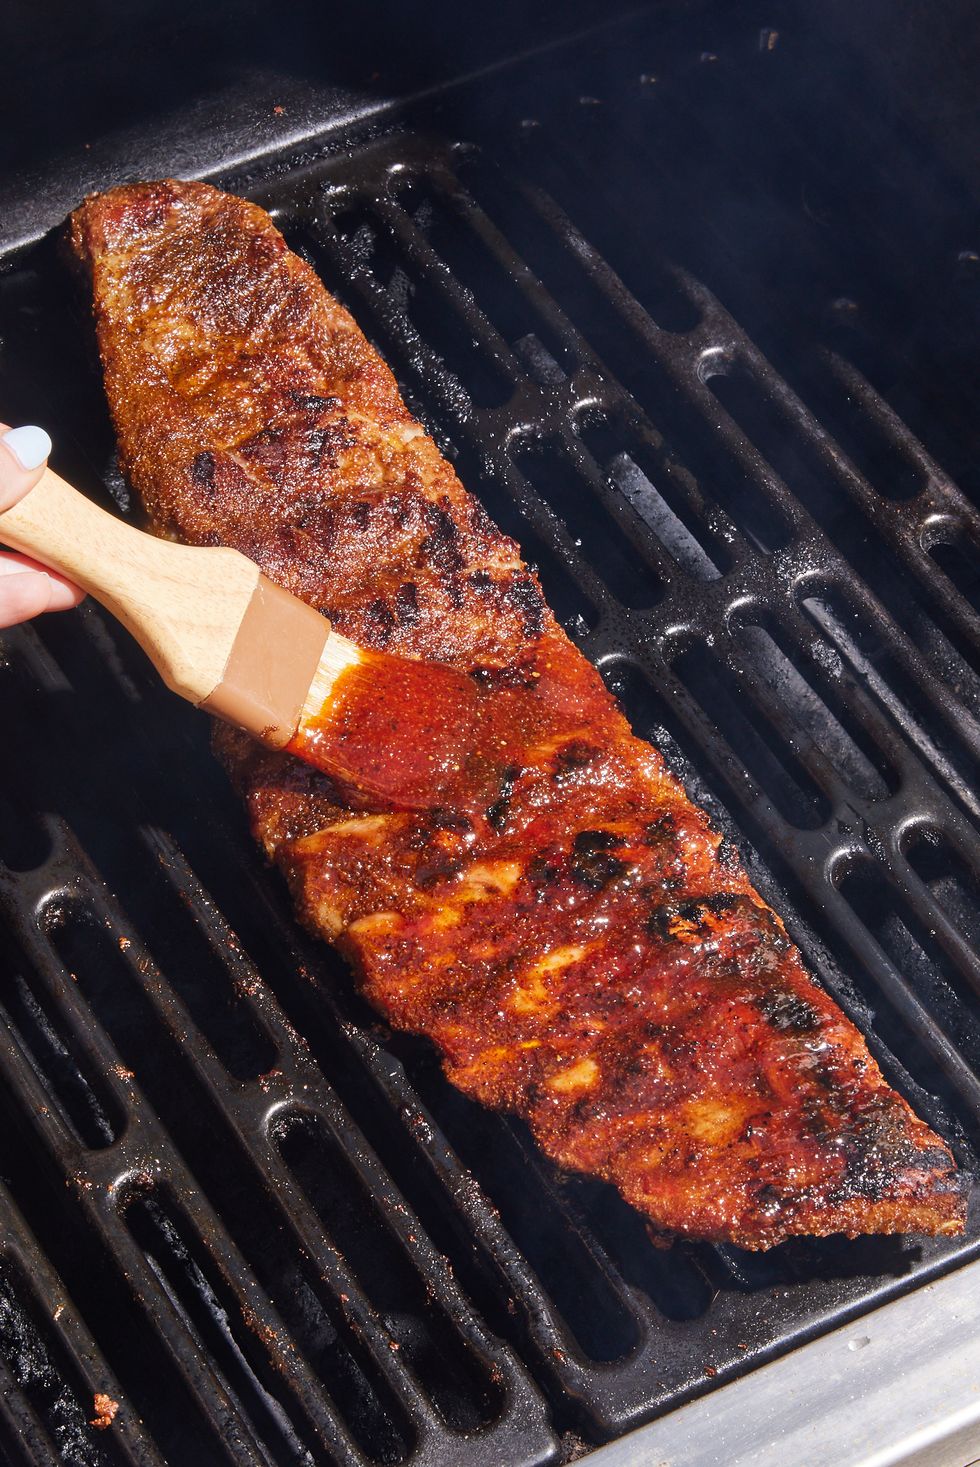 https://hips.hearstapps.com/hmg-prod/images/grilled-ribs-sauce-1649951759.jpg?crop=0.668xw:1.00xh;0.184xw,0&resize=980:*